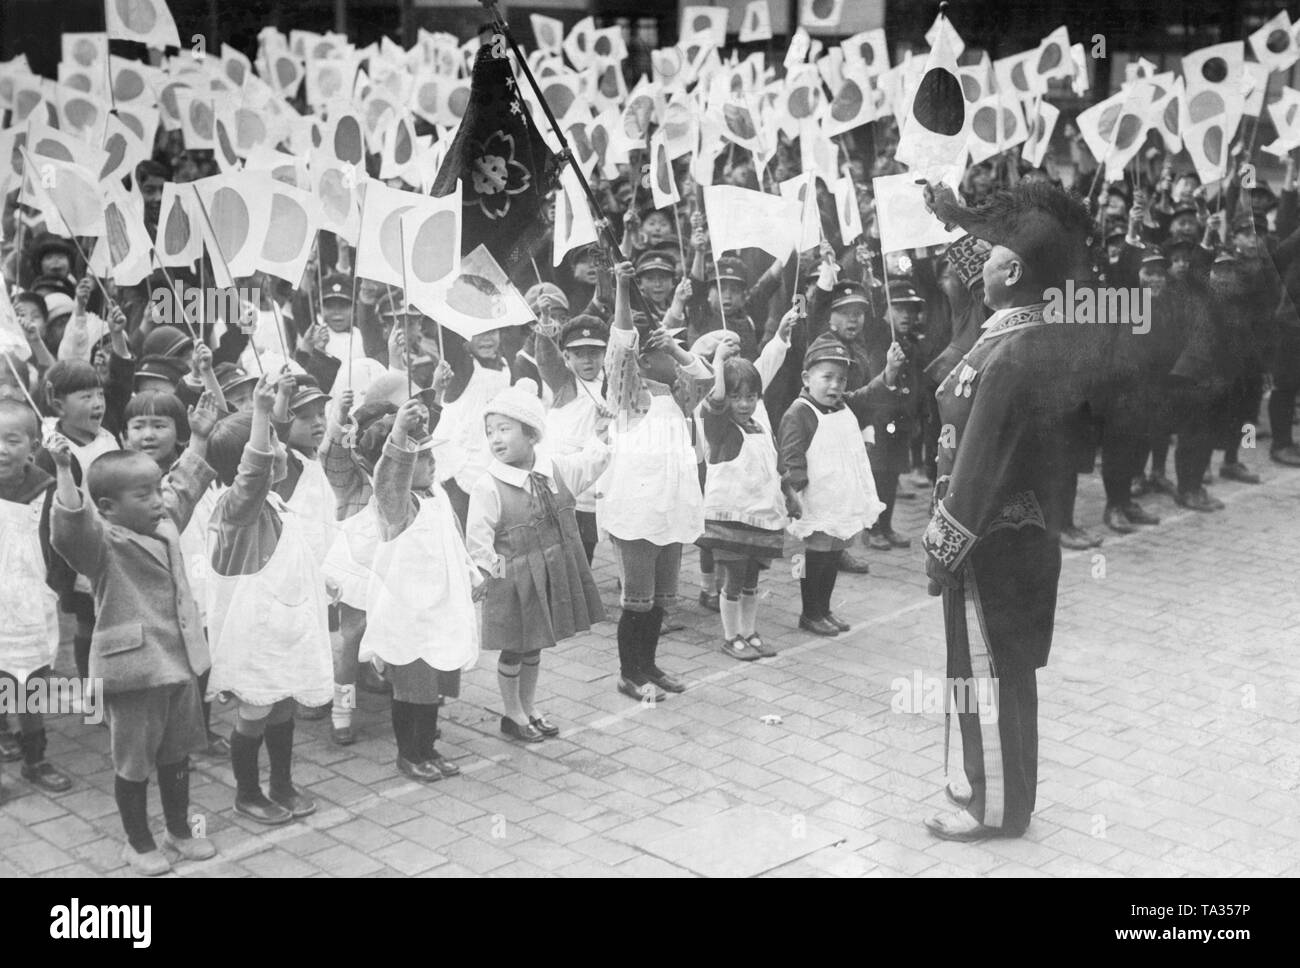 Schoolchildren stand in line with flags on November 10, 1928 at the coronation of the new Japanese emperor Hirohito in Kyoto. Stock Photo